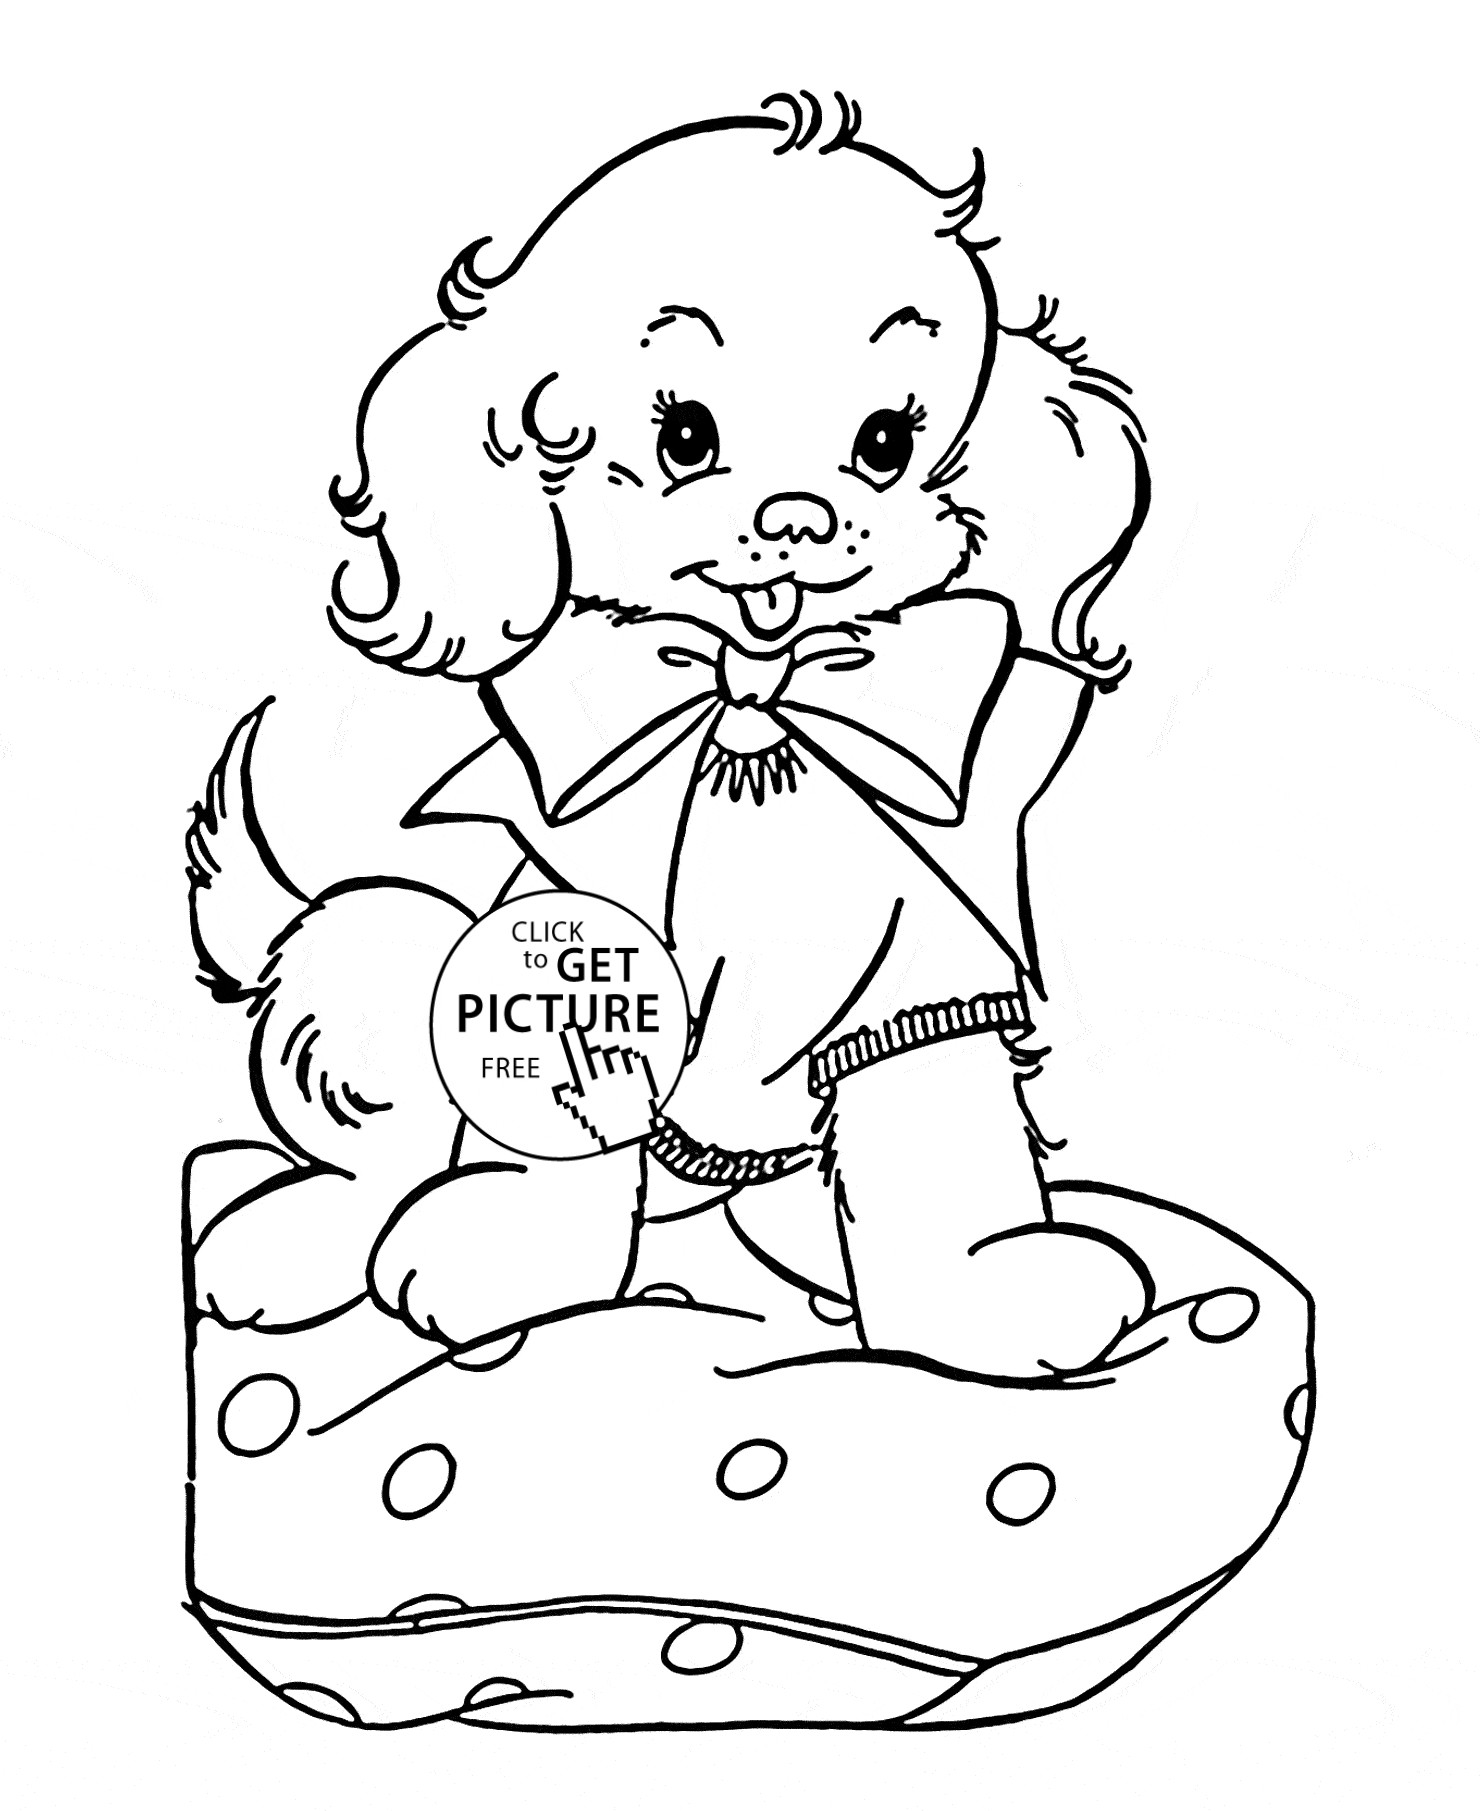 Cute Dog Coloring Pages For Teens
 Cute Puppy coloring page for kids animal coloring pages